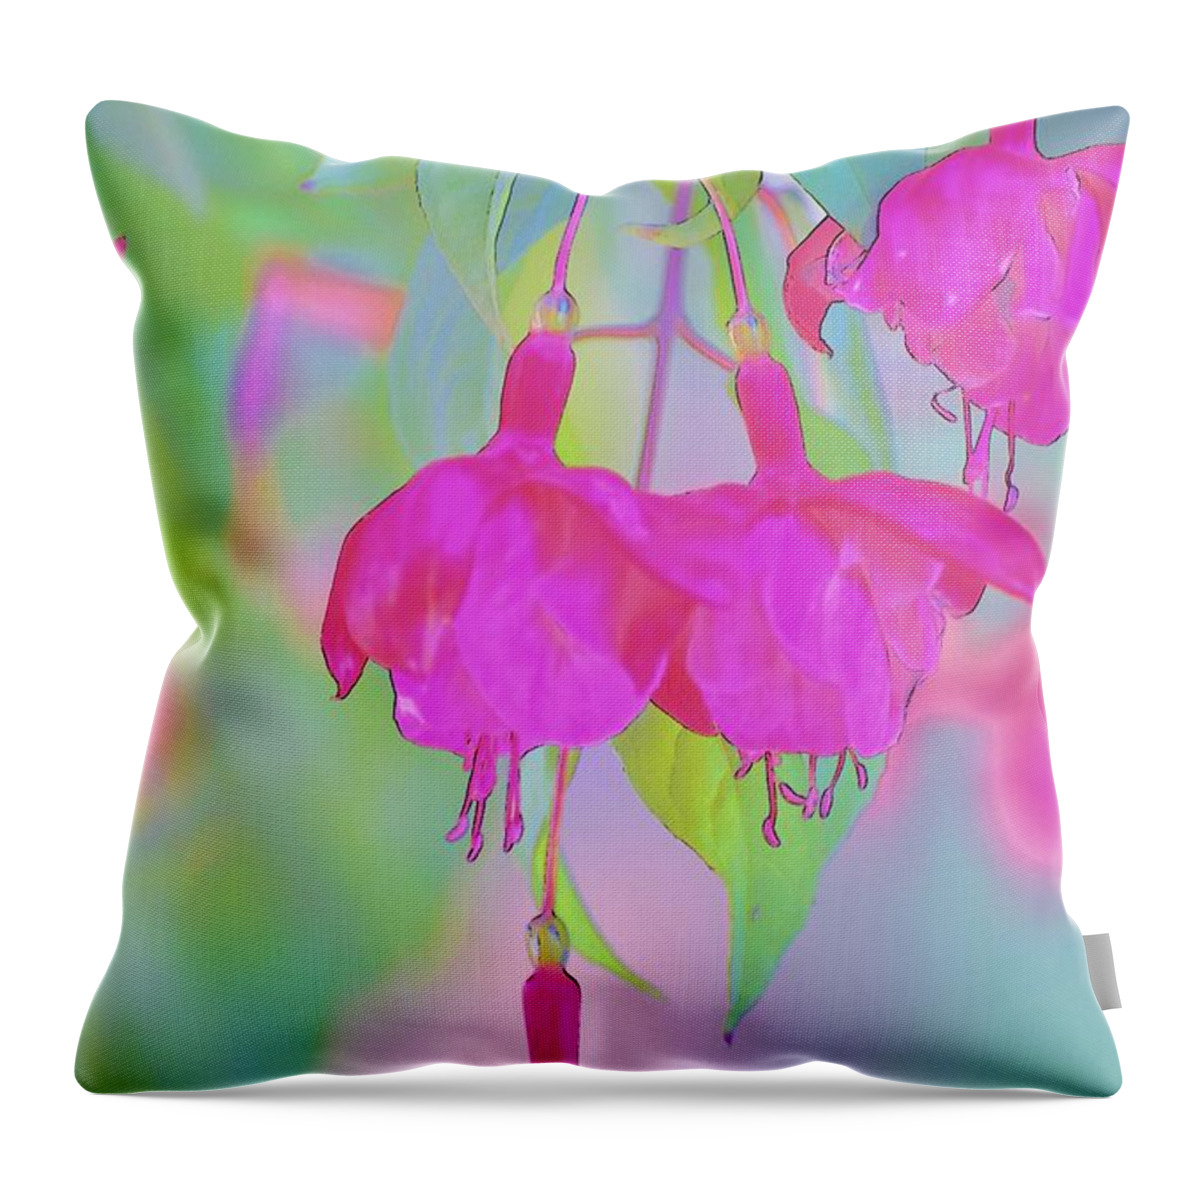 Linda Brody Throw Pillow featuring the digital art Fuchsia Flower Abstract by Linda Brody